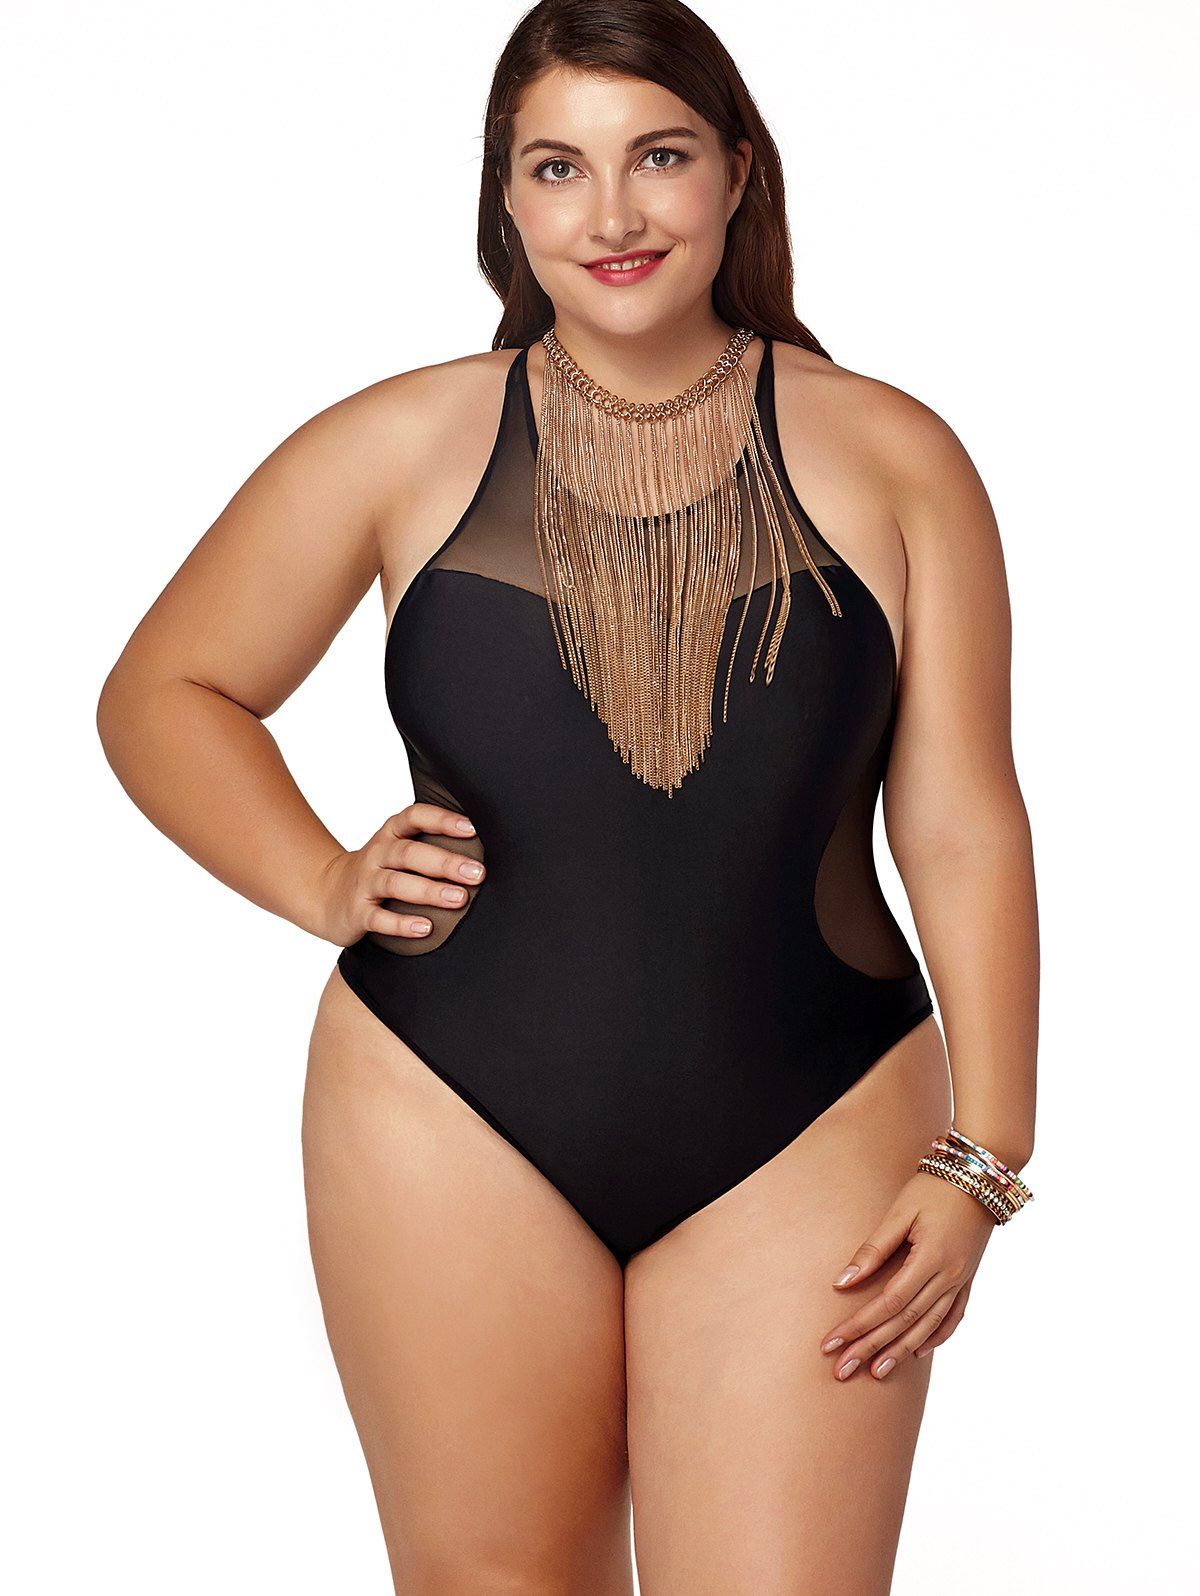 Plus Size One-Piece Swimsuits - Our collection of plus size swimsuits is filled with fun colors and flattering styles for your next trip to the beach or of our plus size one-piece swimsuits give you the support you're looking for, so you always feel comfortable and confident.